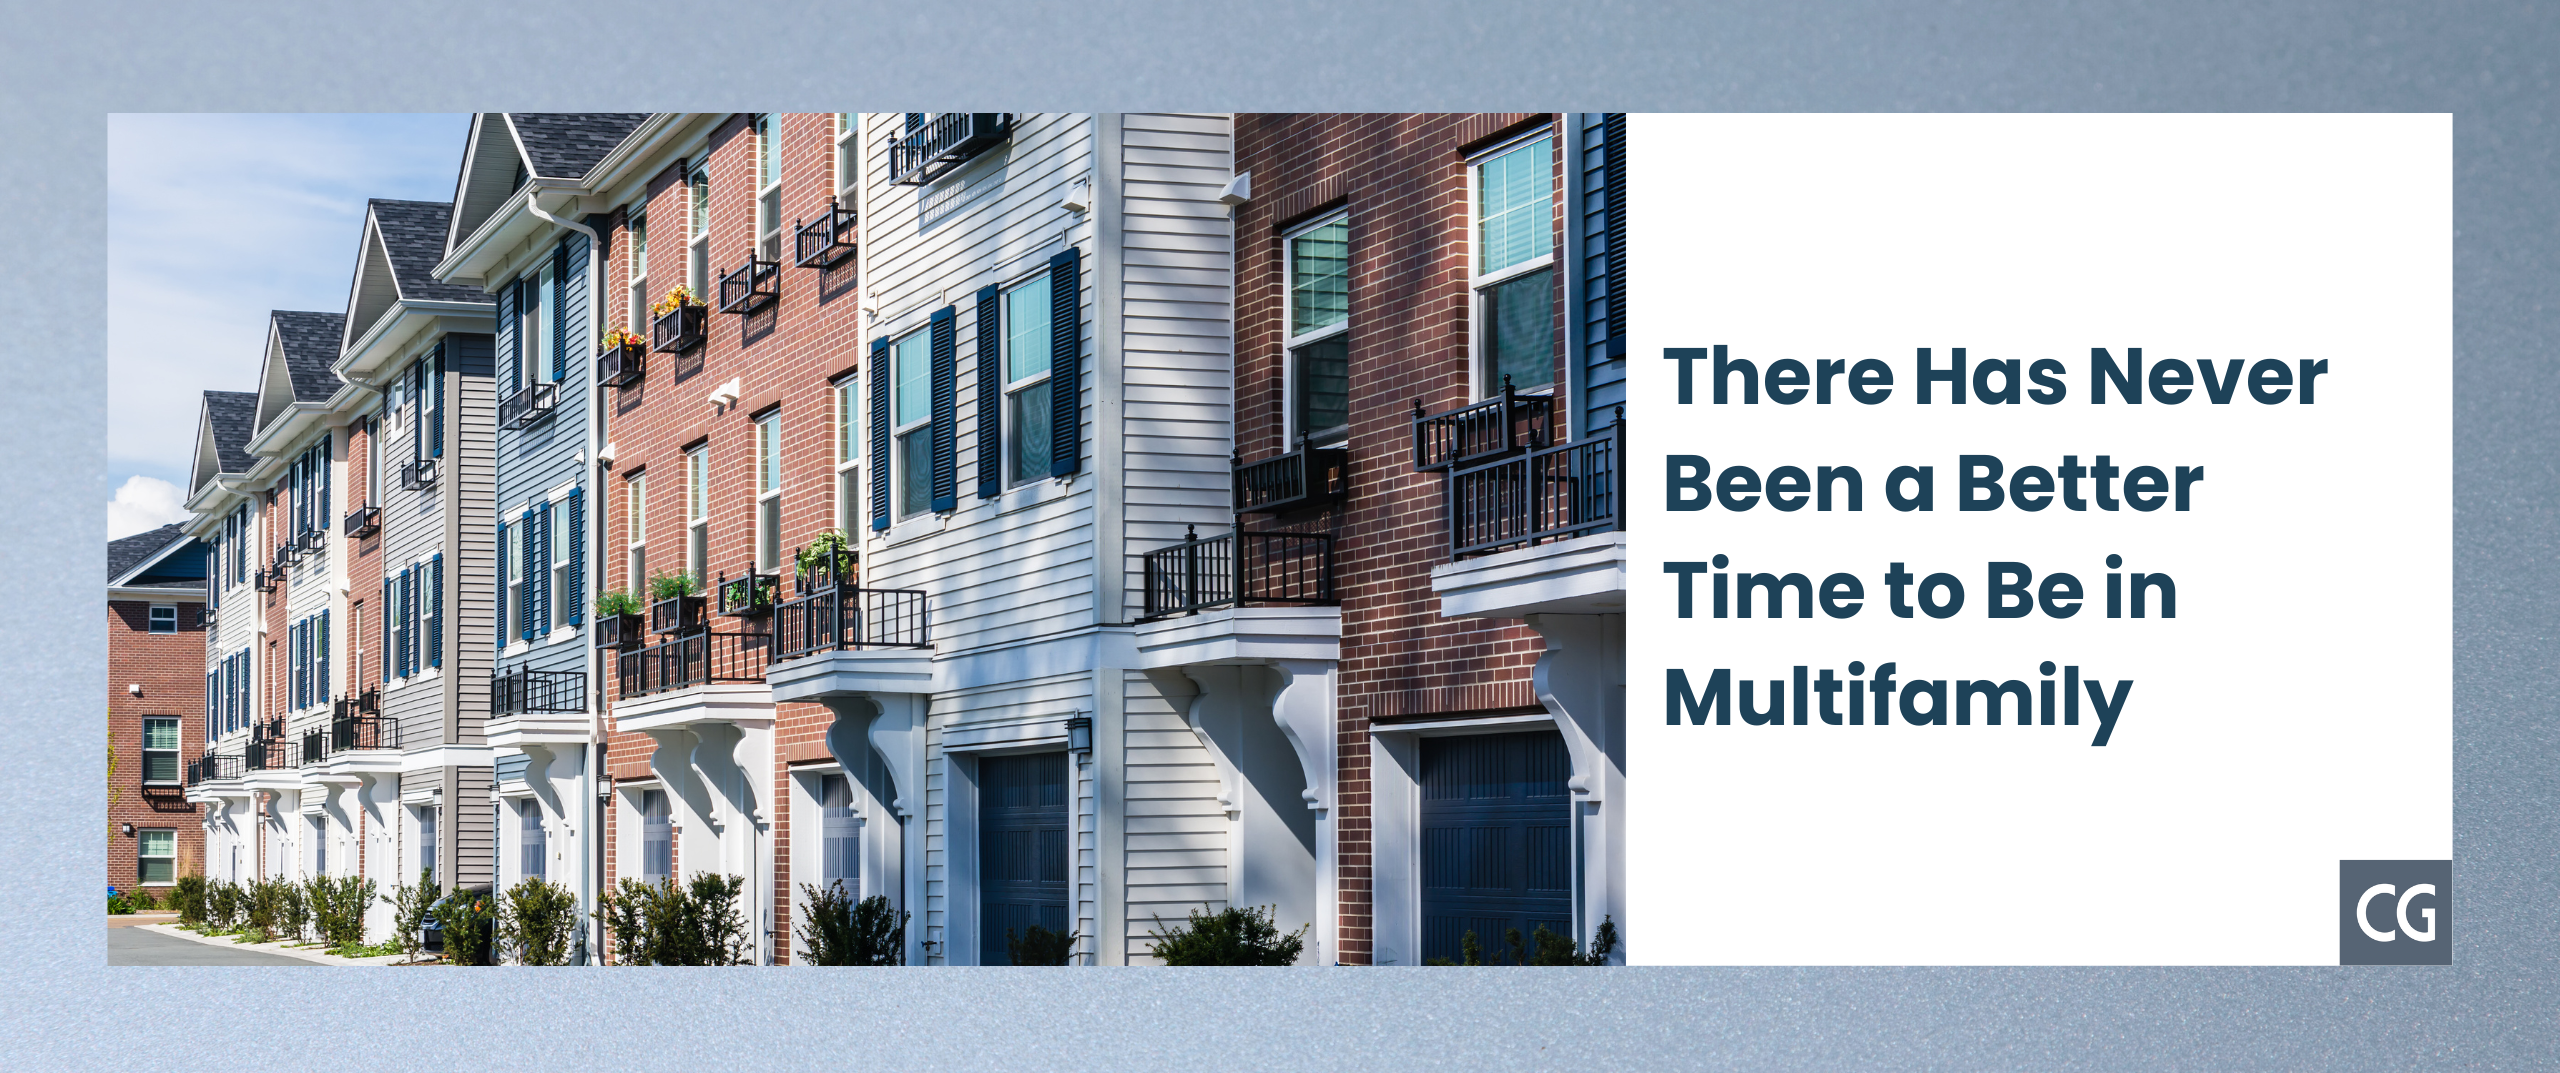 There Has Never Been a Better Time to Be in Multifamily